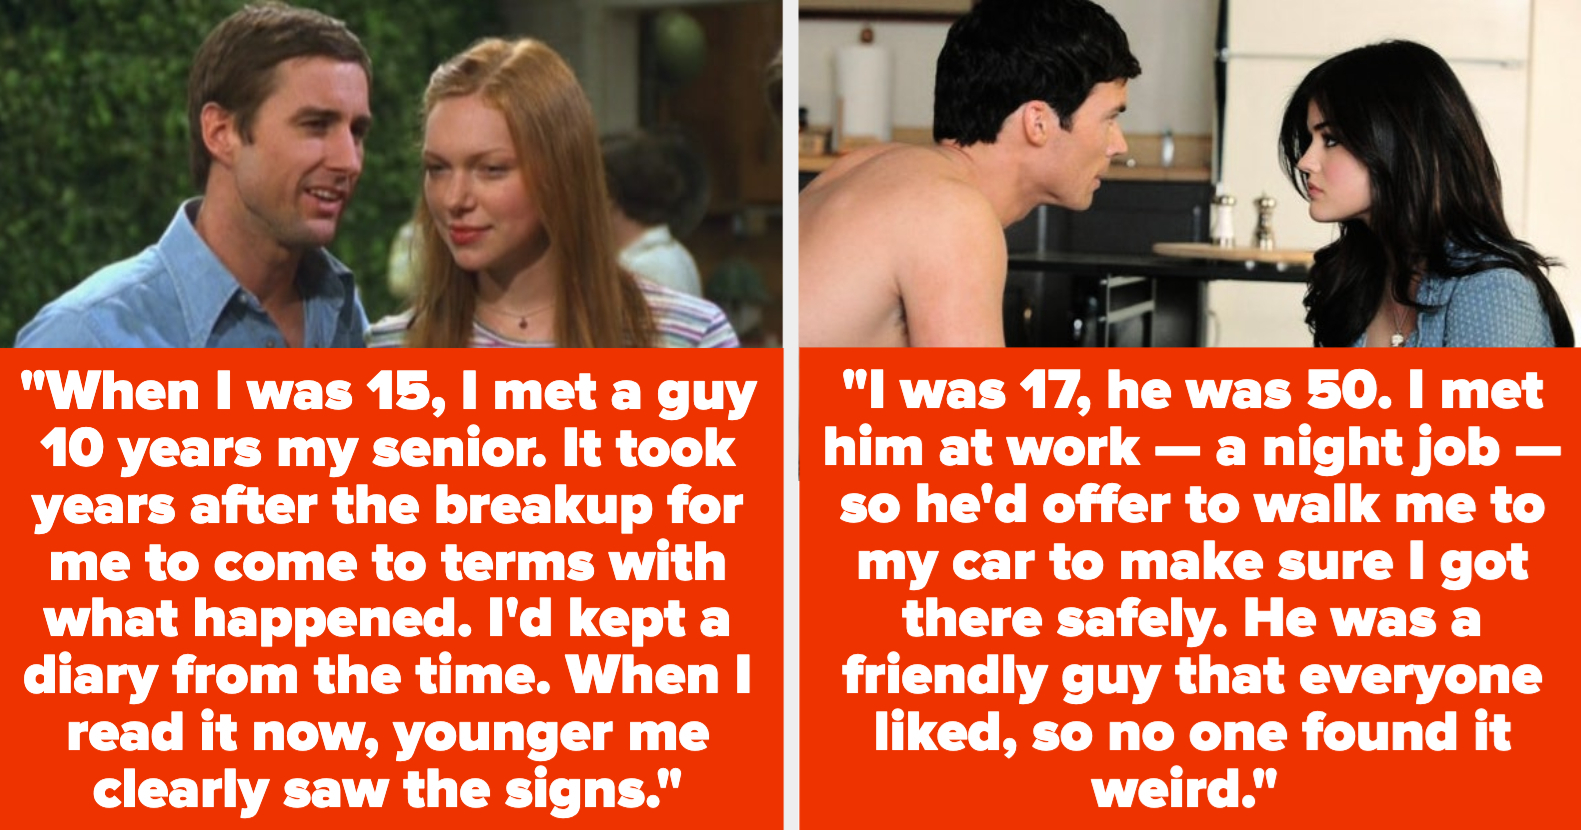 Women Who “Dated” Predatory Older Men As Teens Share Their Stories